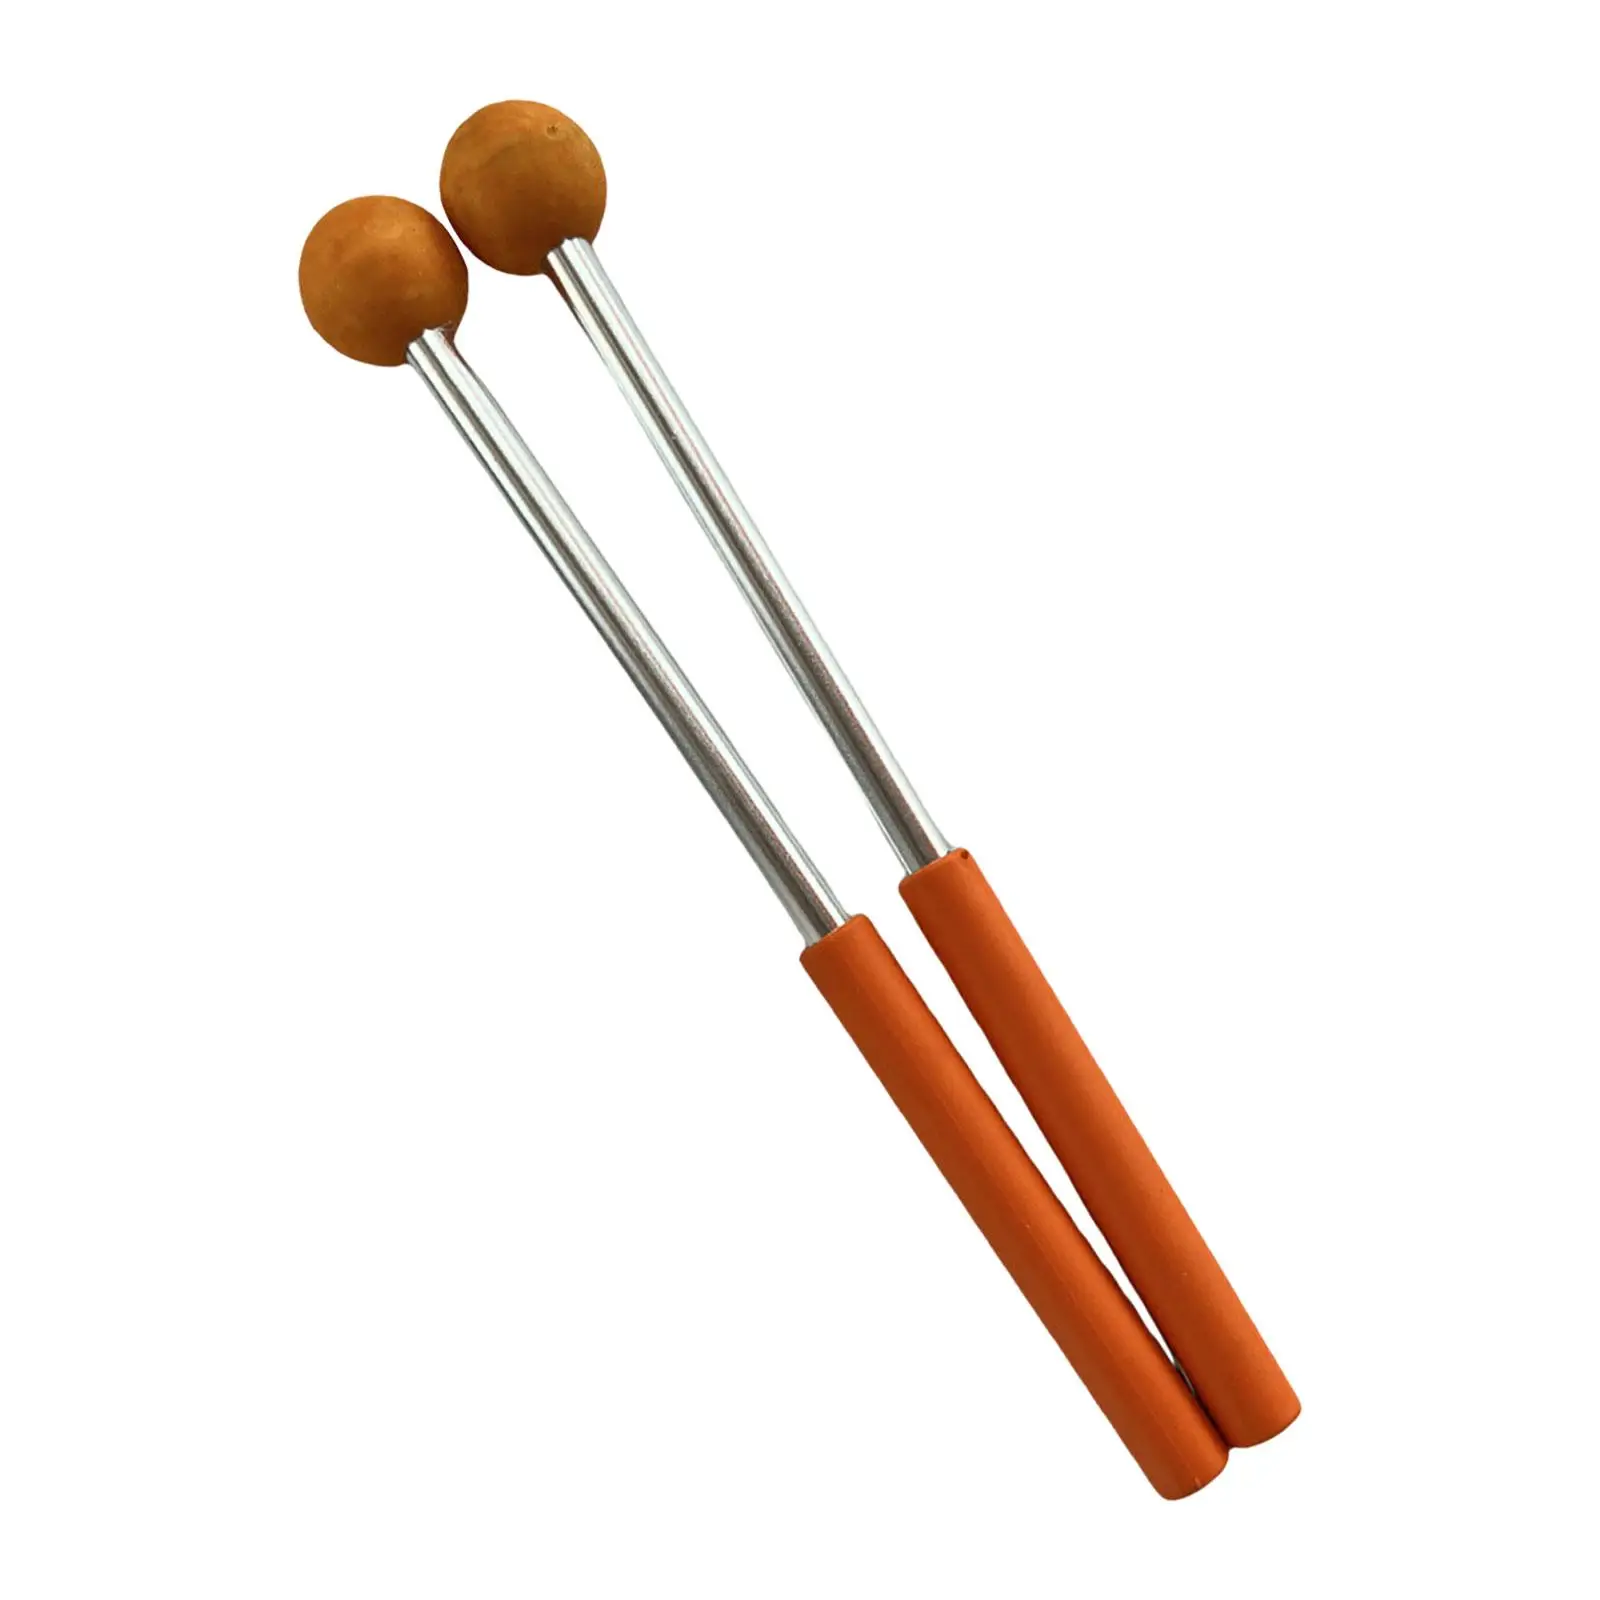 2 Pieces Percussion Drumsticks Metal Rod Lightweight Rubber Head Drum Mallets